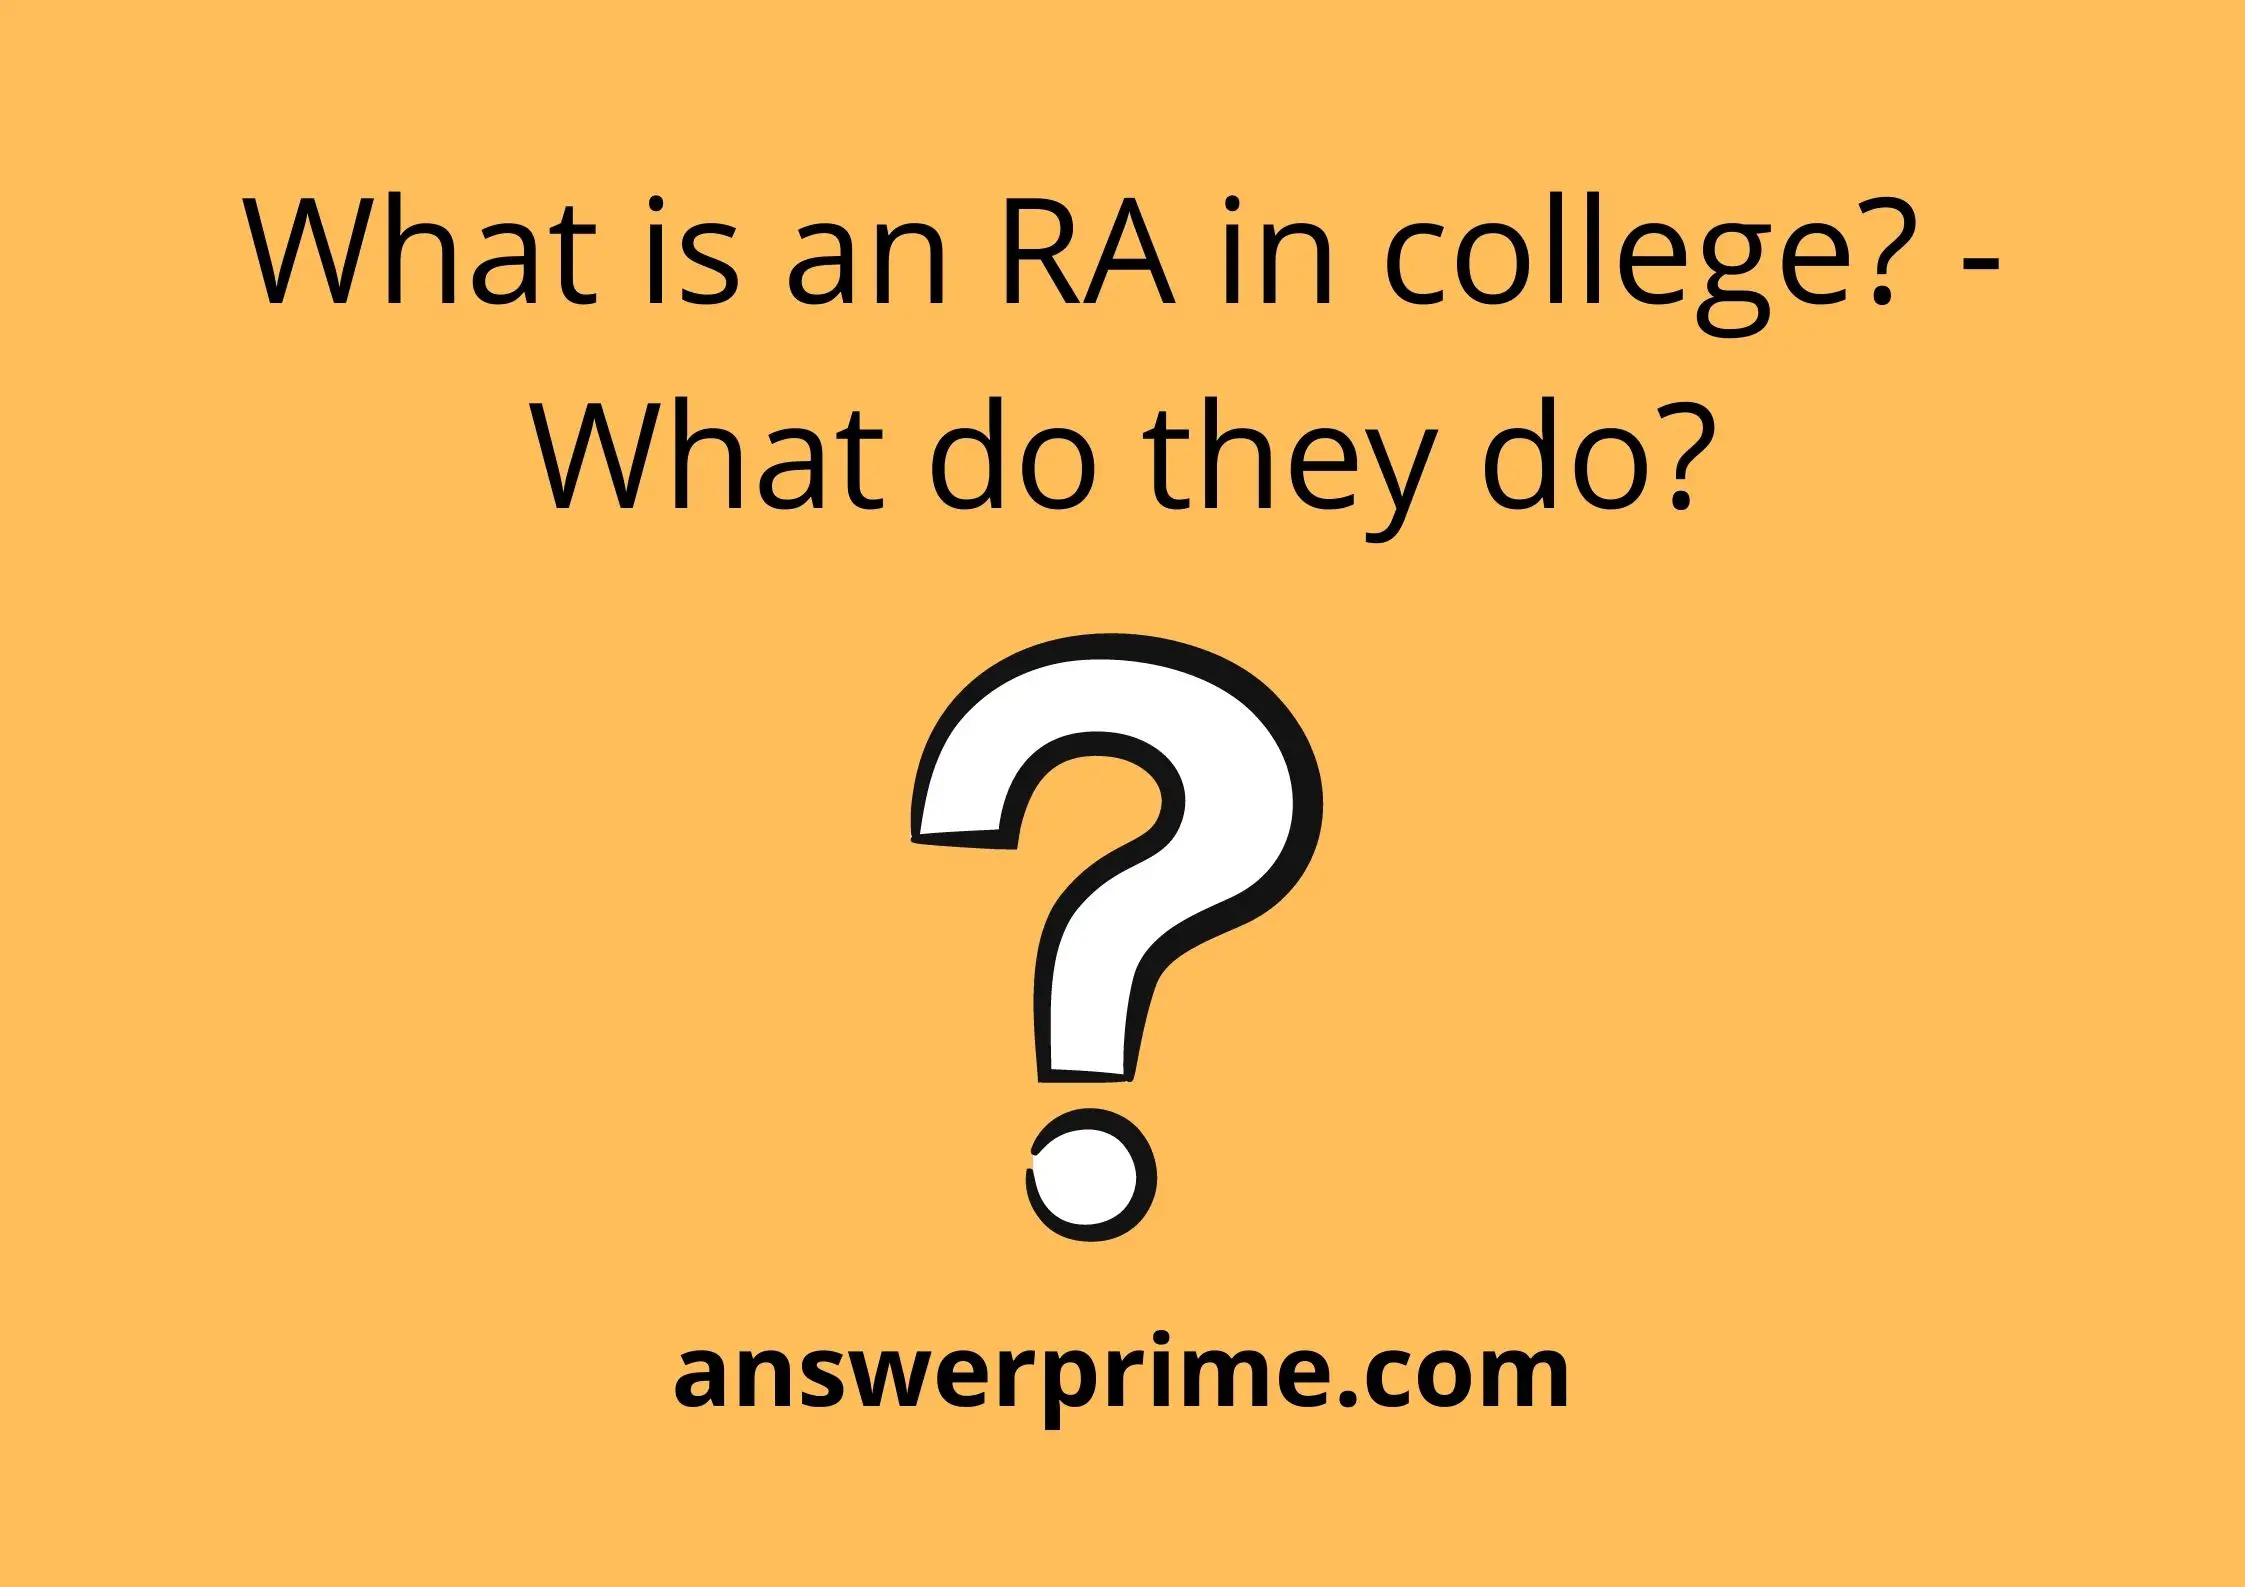 What is an RA in college? - What do they do?